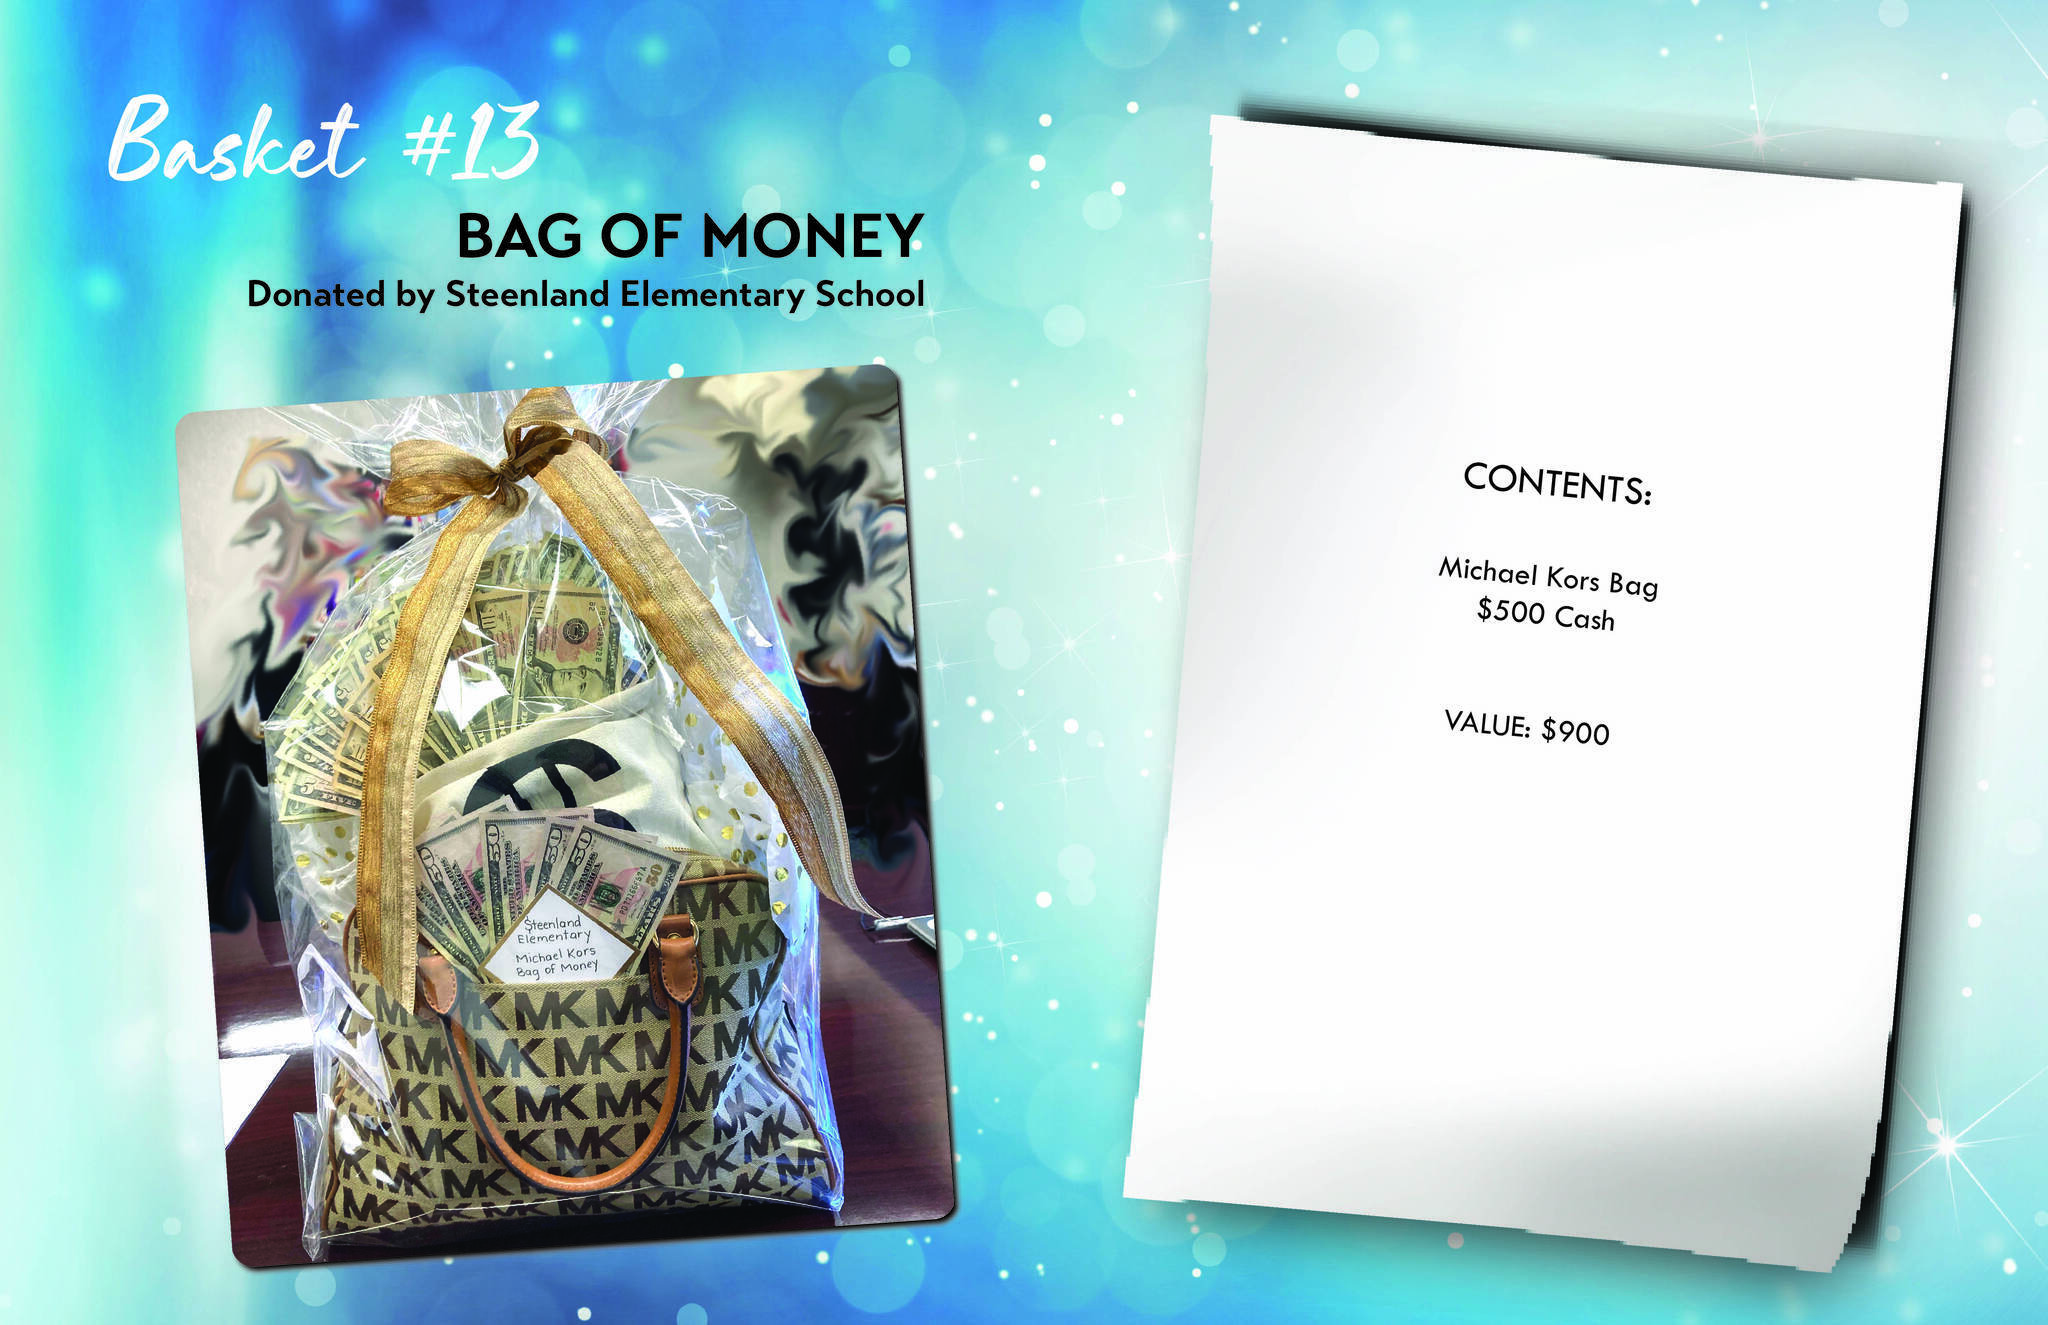 Donated by Steenland Elementary School: Features a Michael Kors bag and $500 cash.